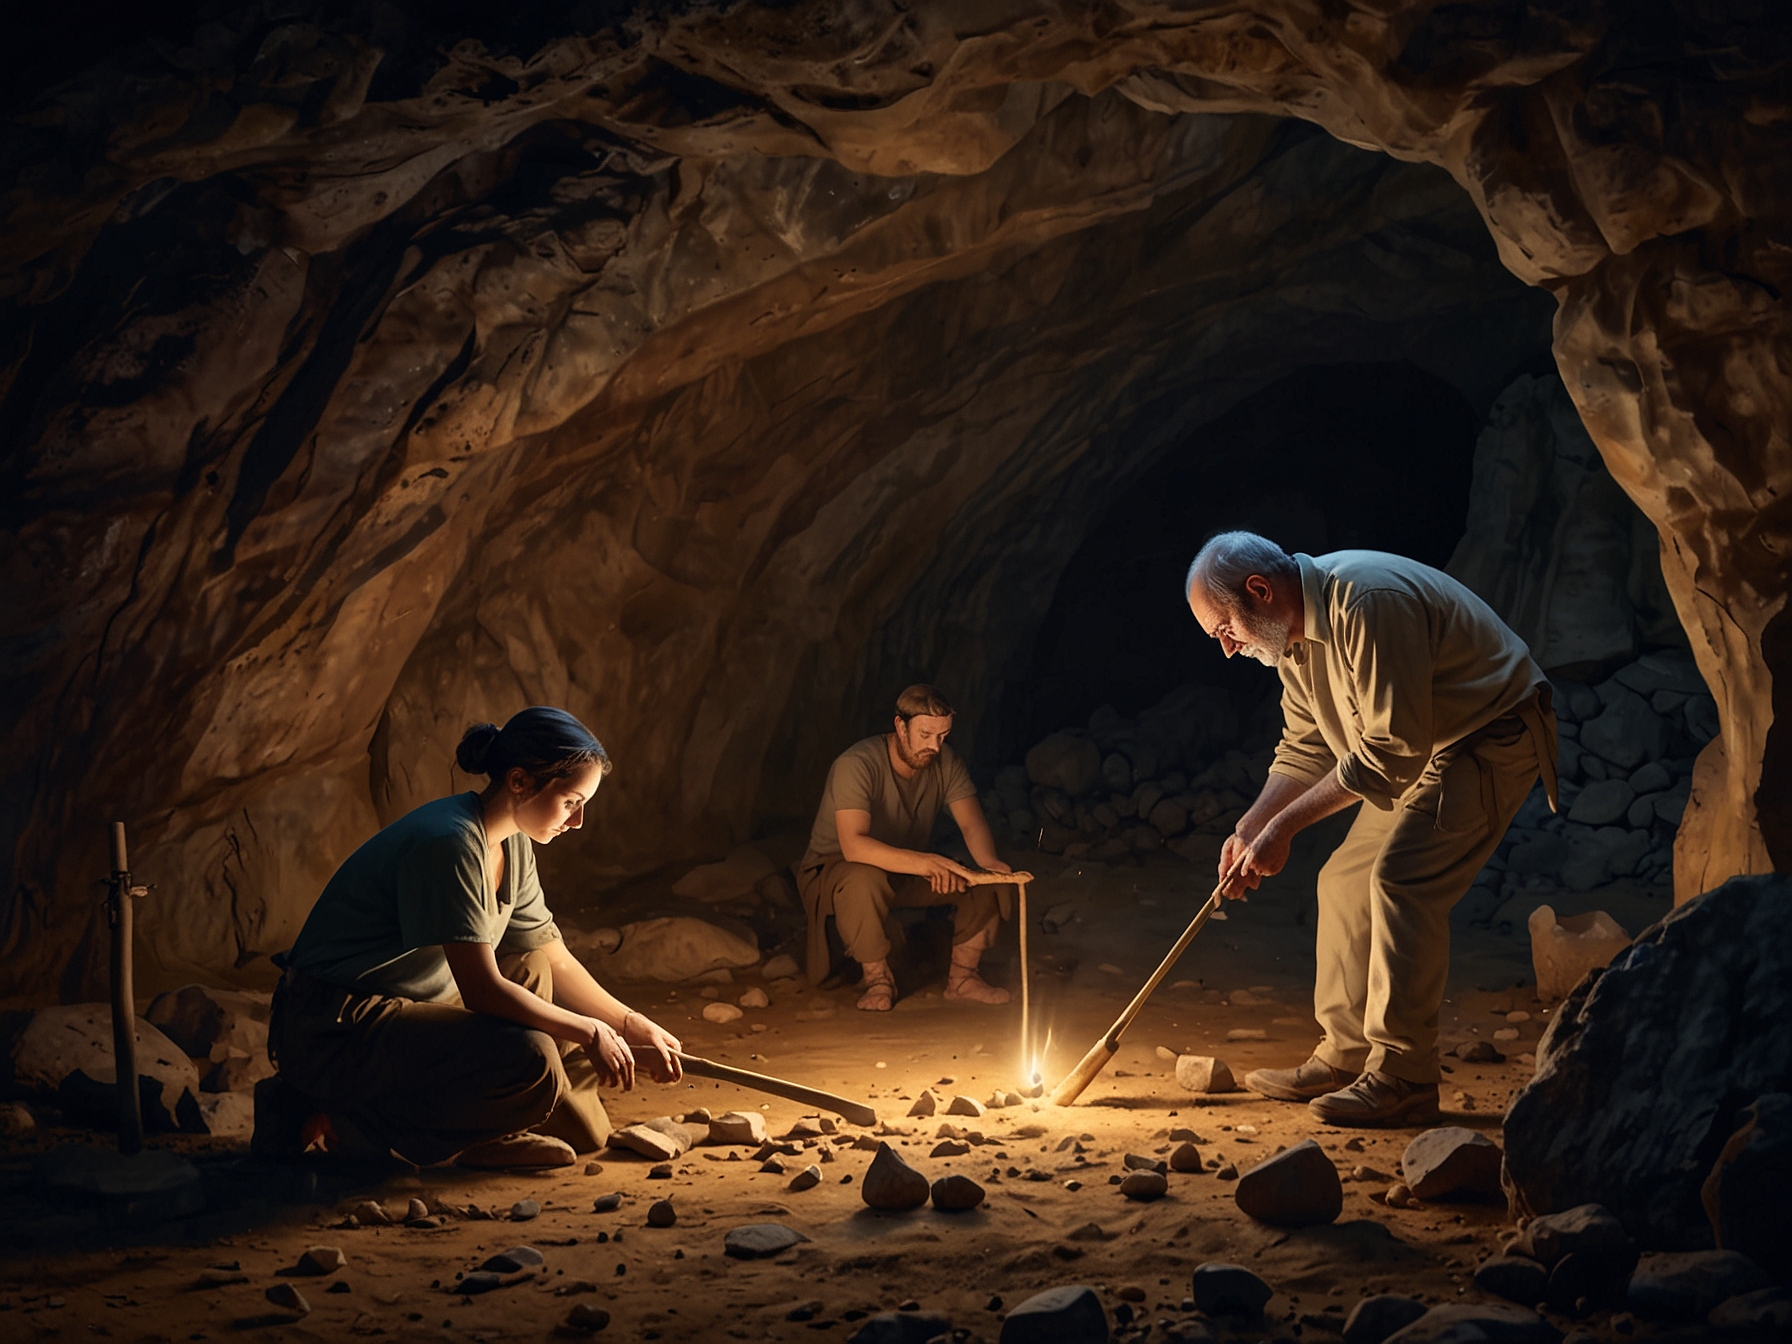 Archaeologists conducting excavations in the Chaves cave, examining faunal remains which reveal evidence of pig consumption and ancient butchery practices in Neolithic times.